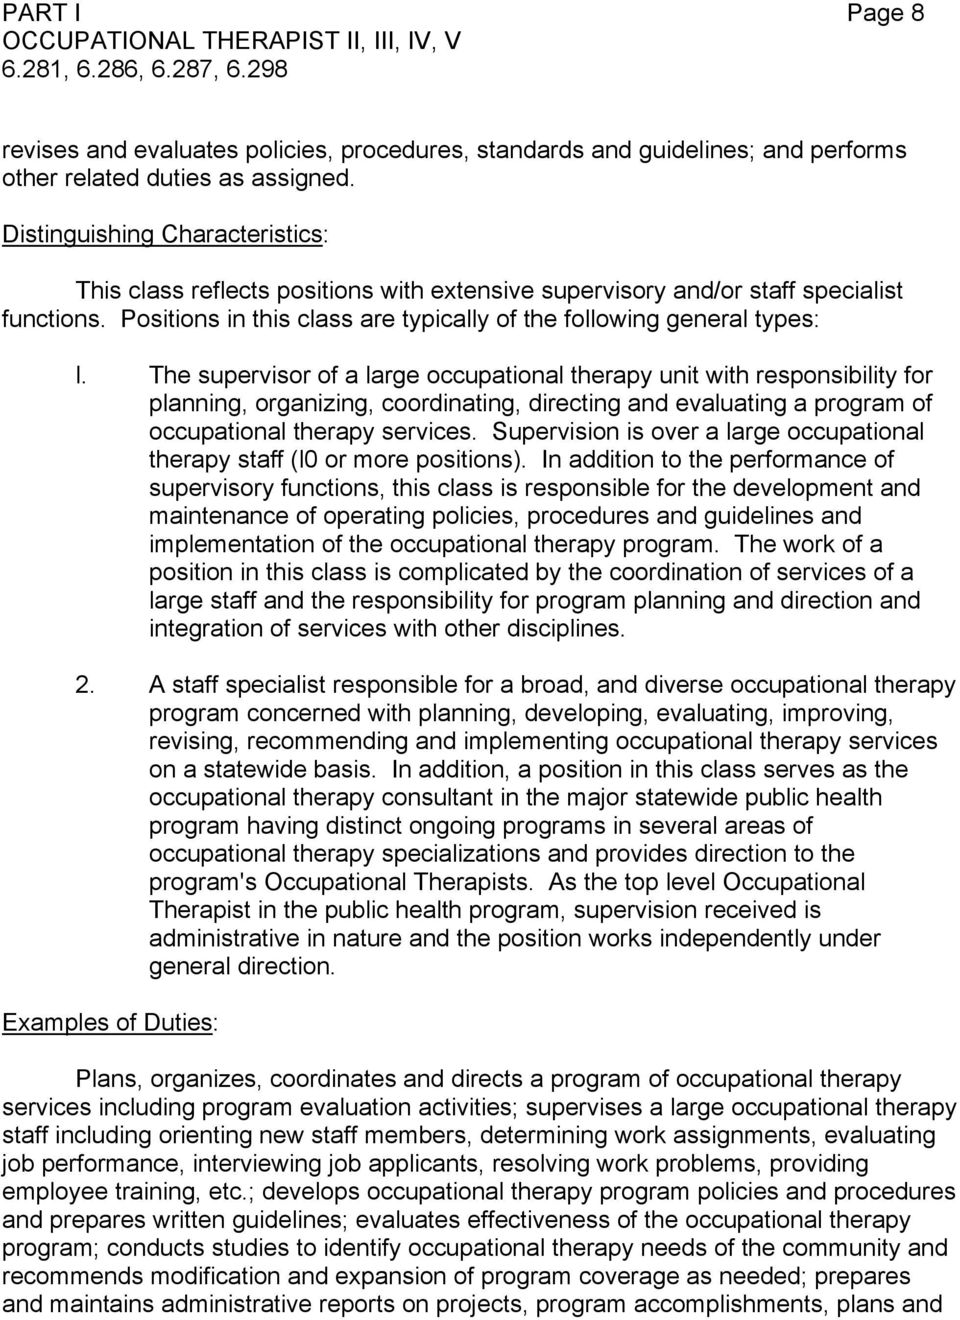 The supervisor of a large occupational therapy unit with responsibility for planning, organizing, coordinating, directing and evaluating a program of occupational therapy services.